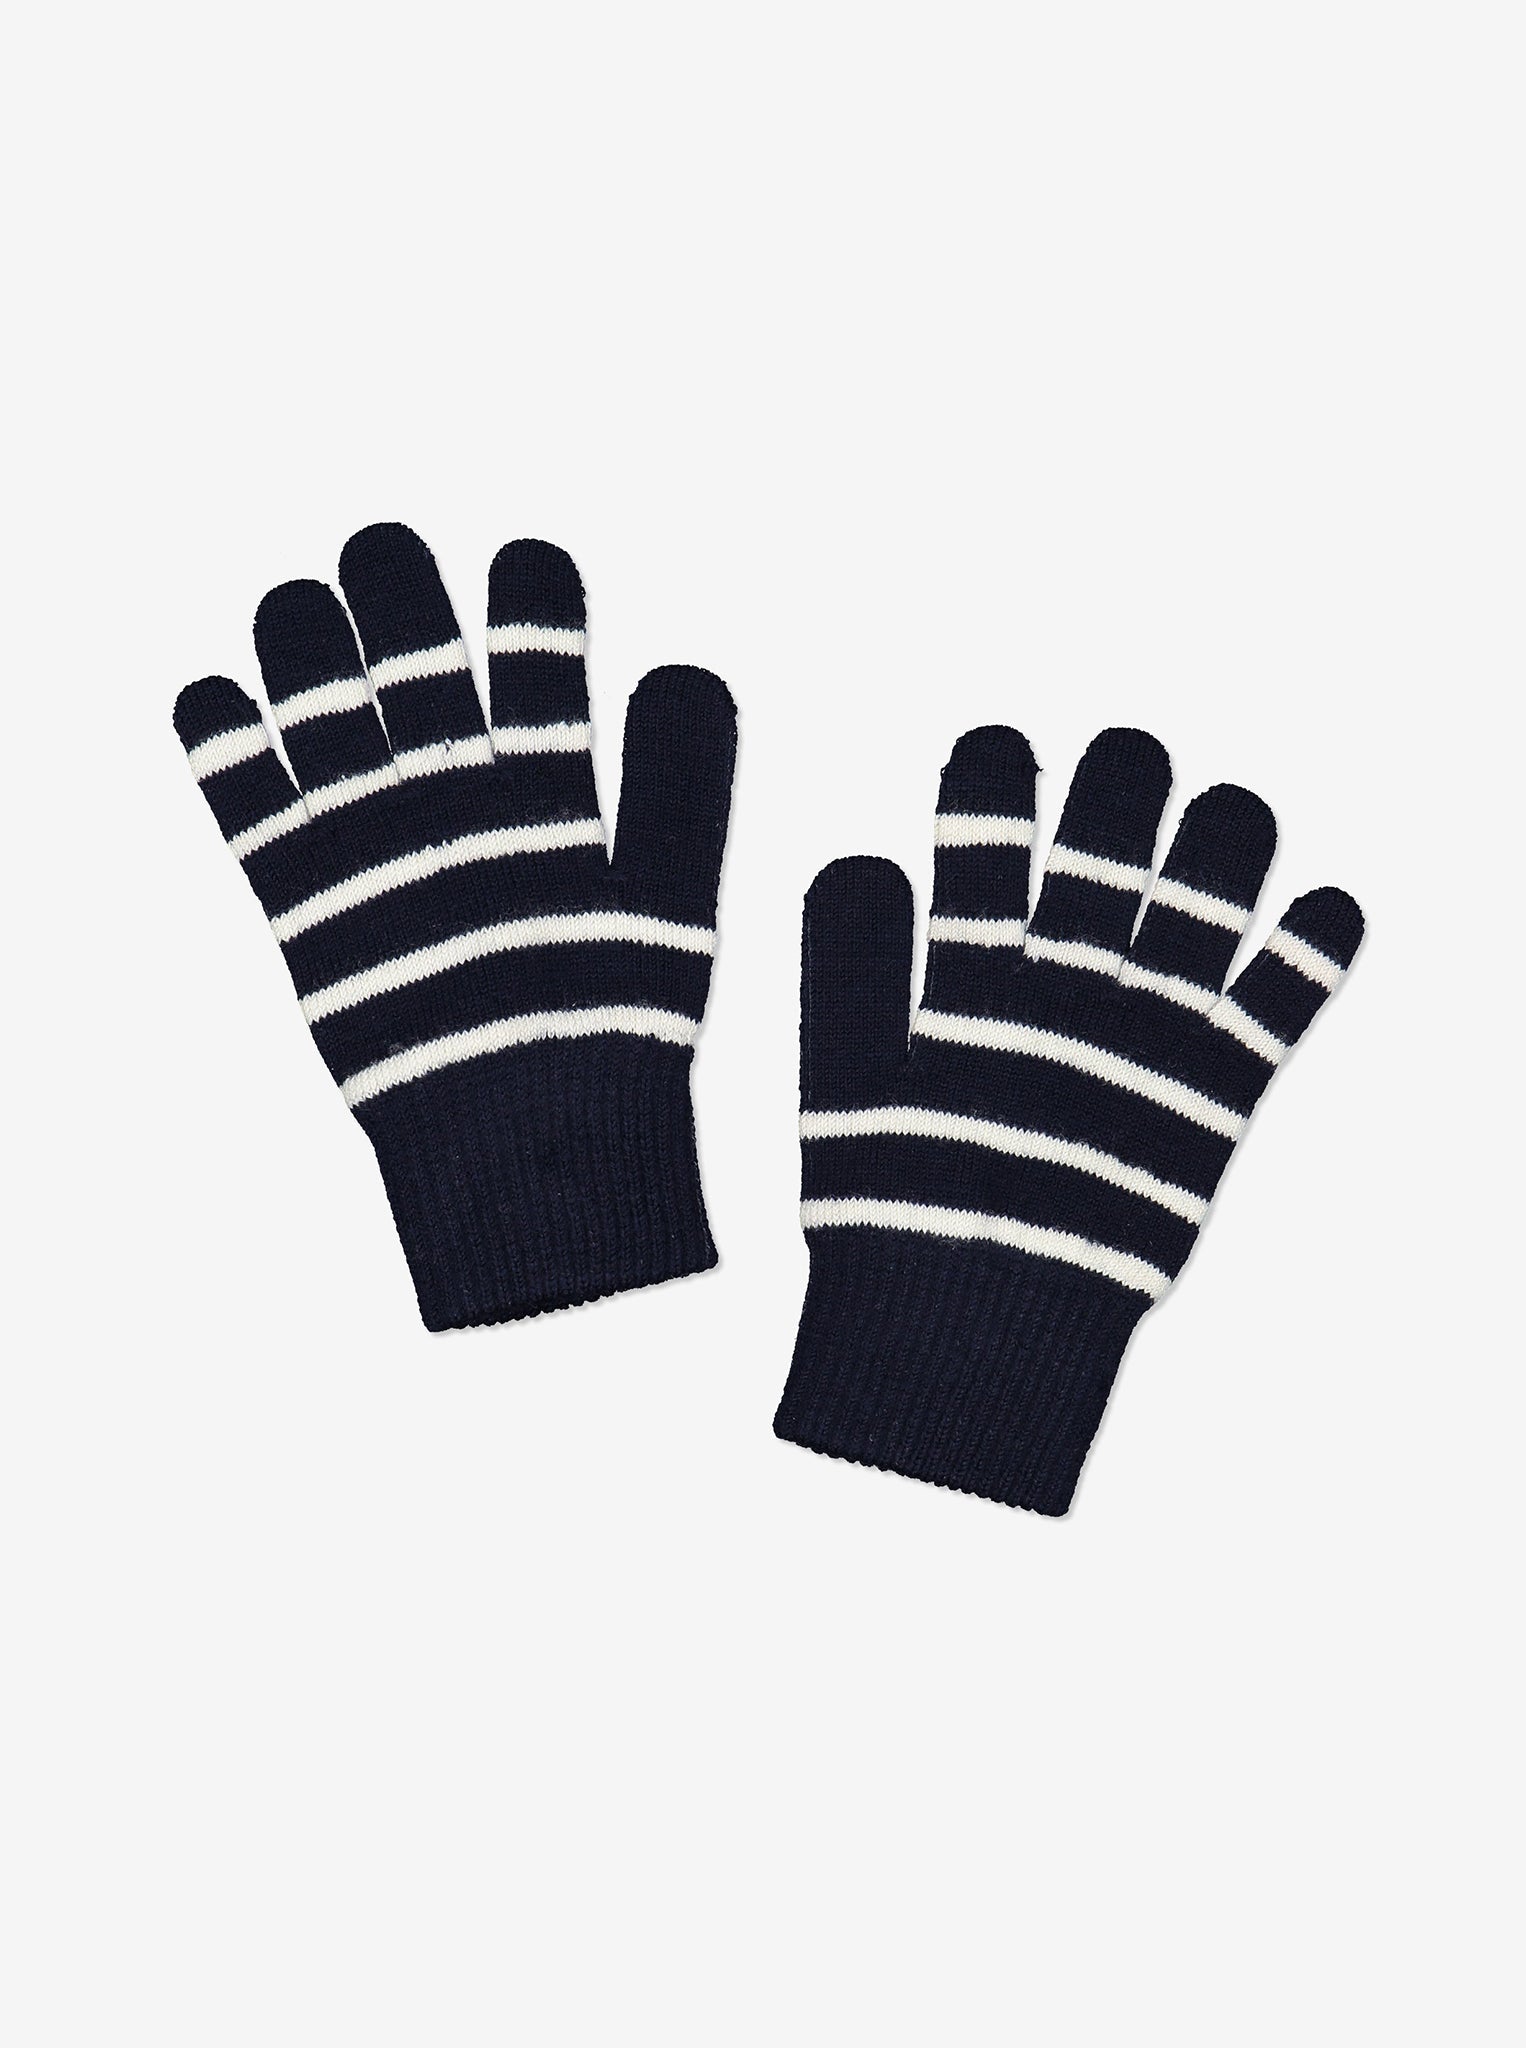 Navy Magic Kids Gloves Multipack from the Polarn O. Pyret kidswear collection. Ethically produced outerwear.